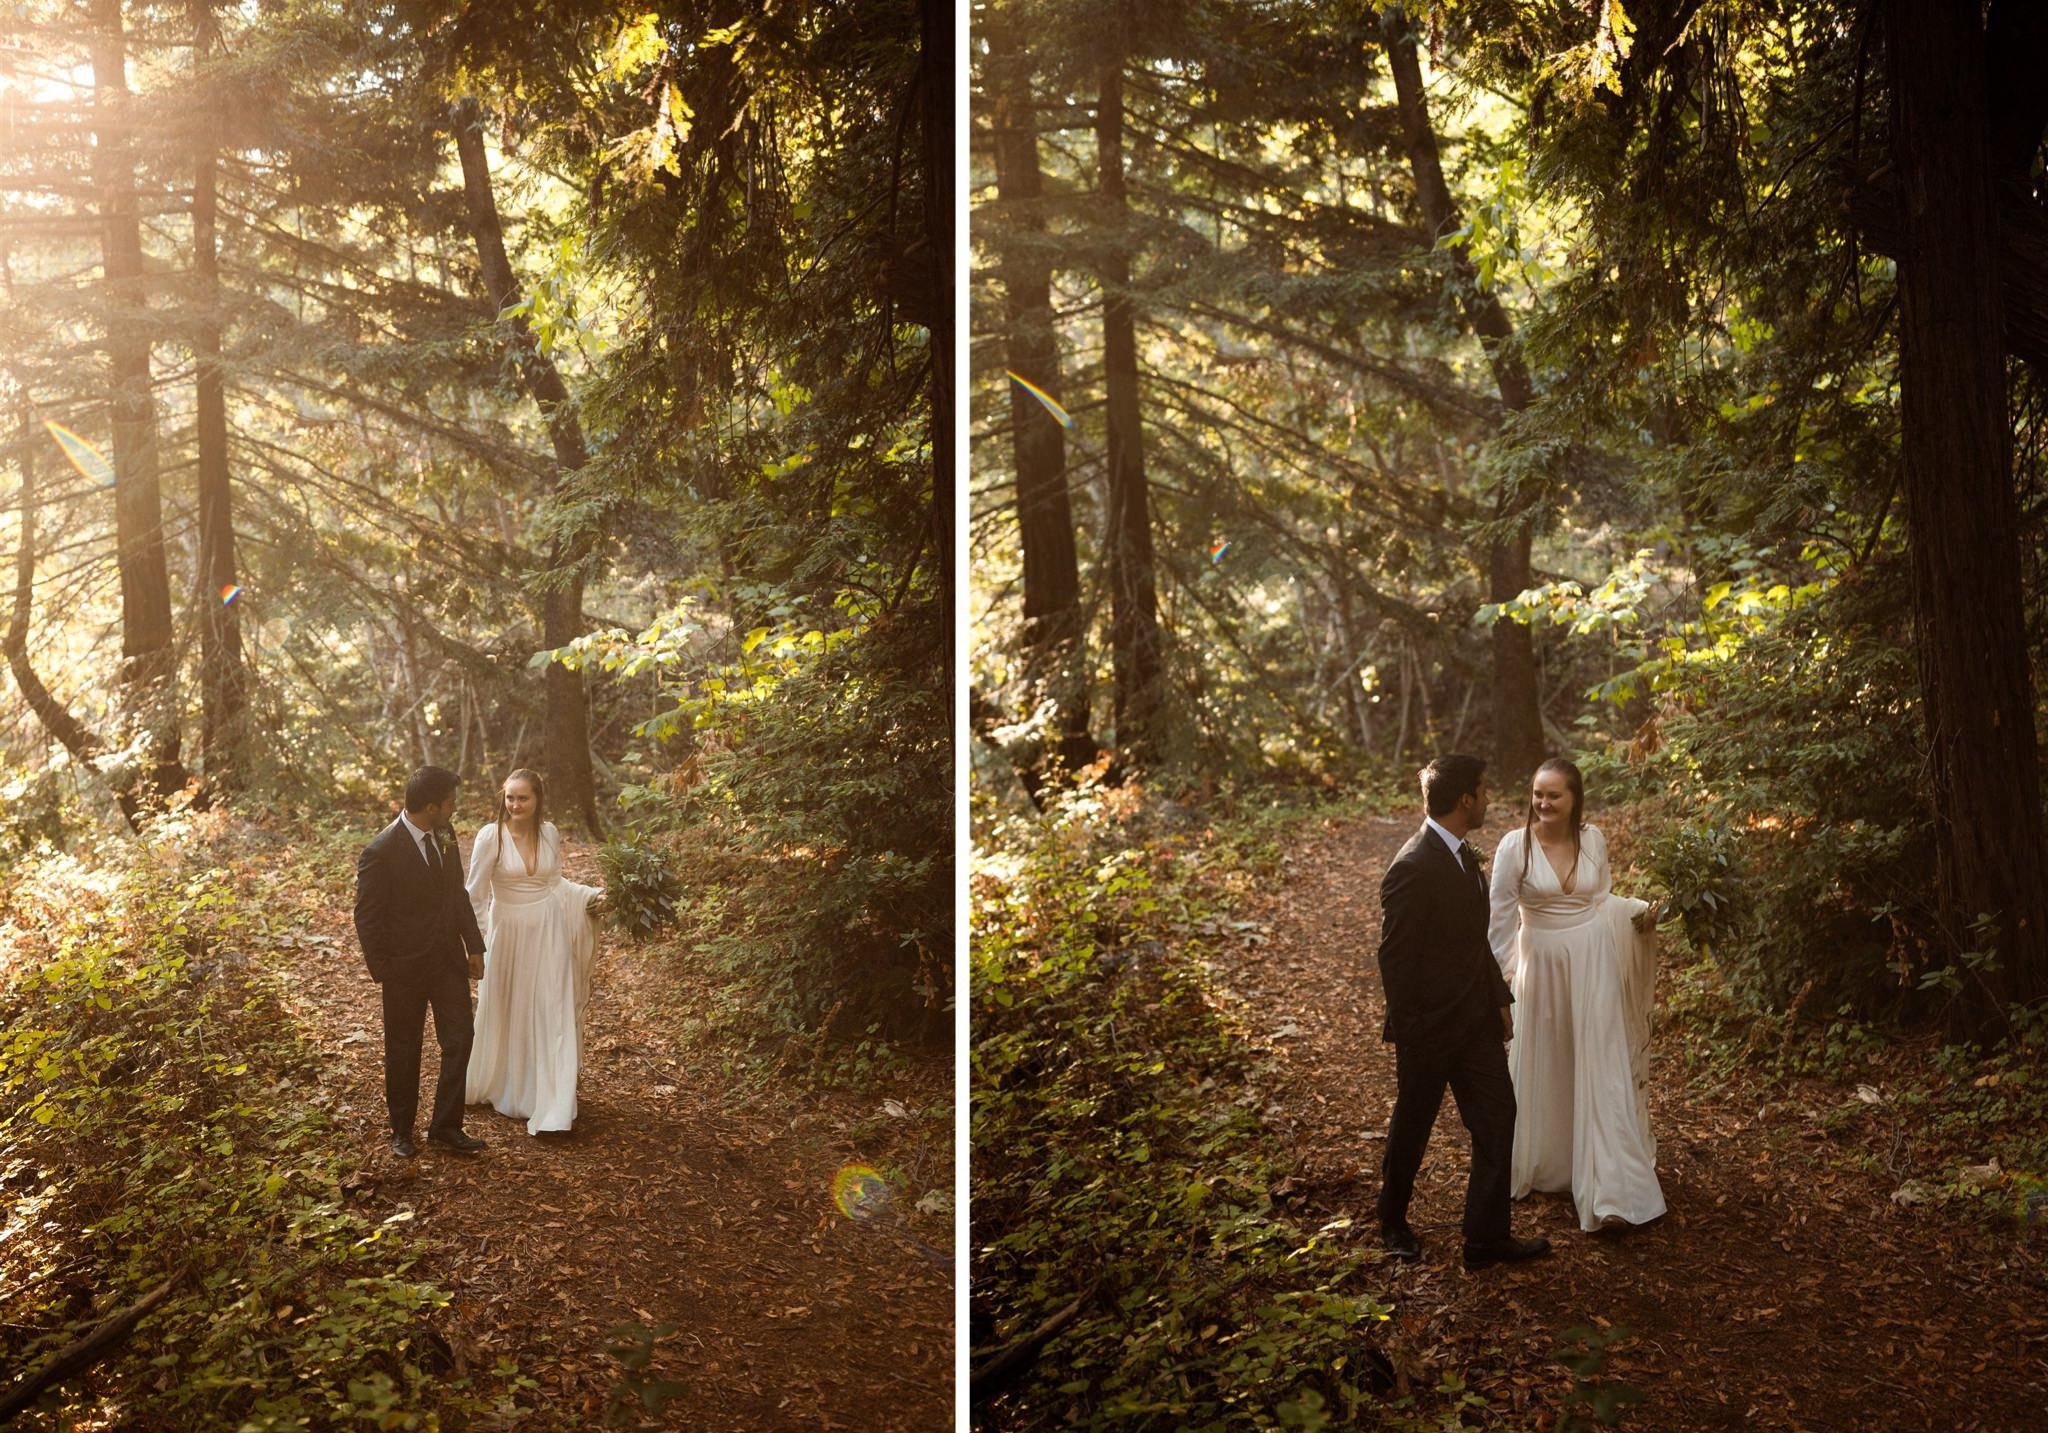 030_Two-Day Big Sur Redwoods Elopement with Family_Will Khoury Elopement Photographer.jpg